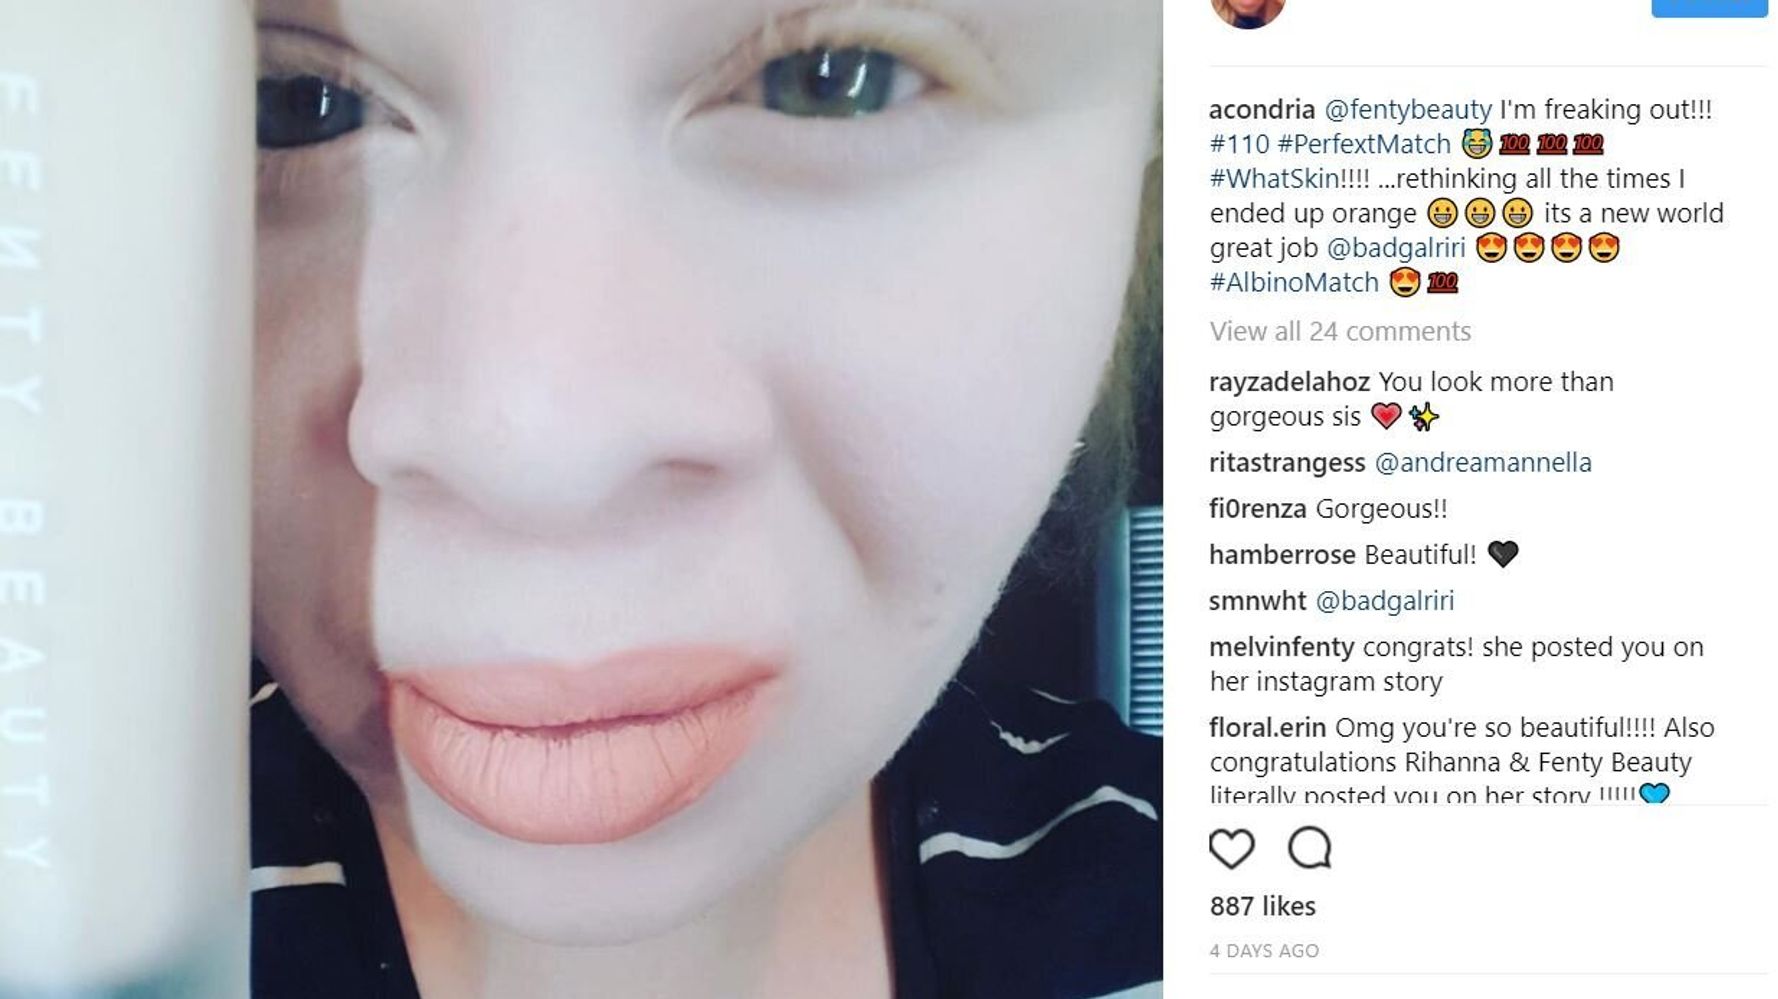 Produktiv ly karakter Fenty Beauty Even Has Shades For People With Albinism | HuffPost Style